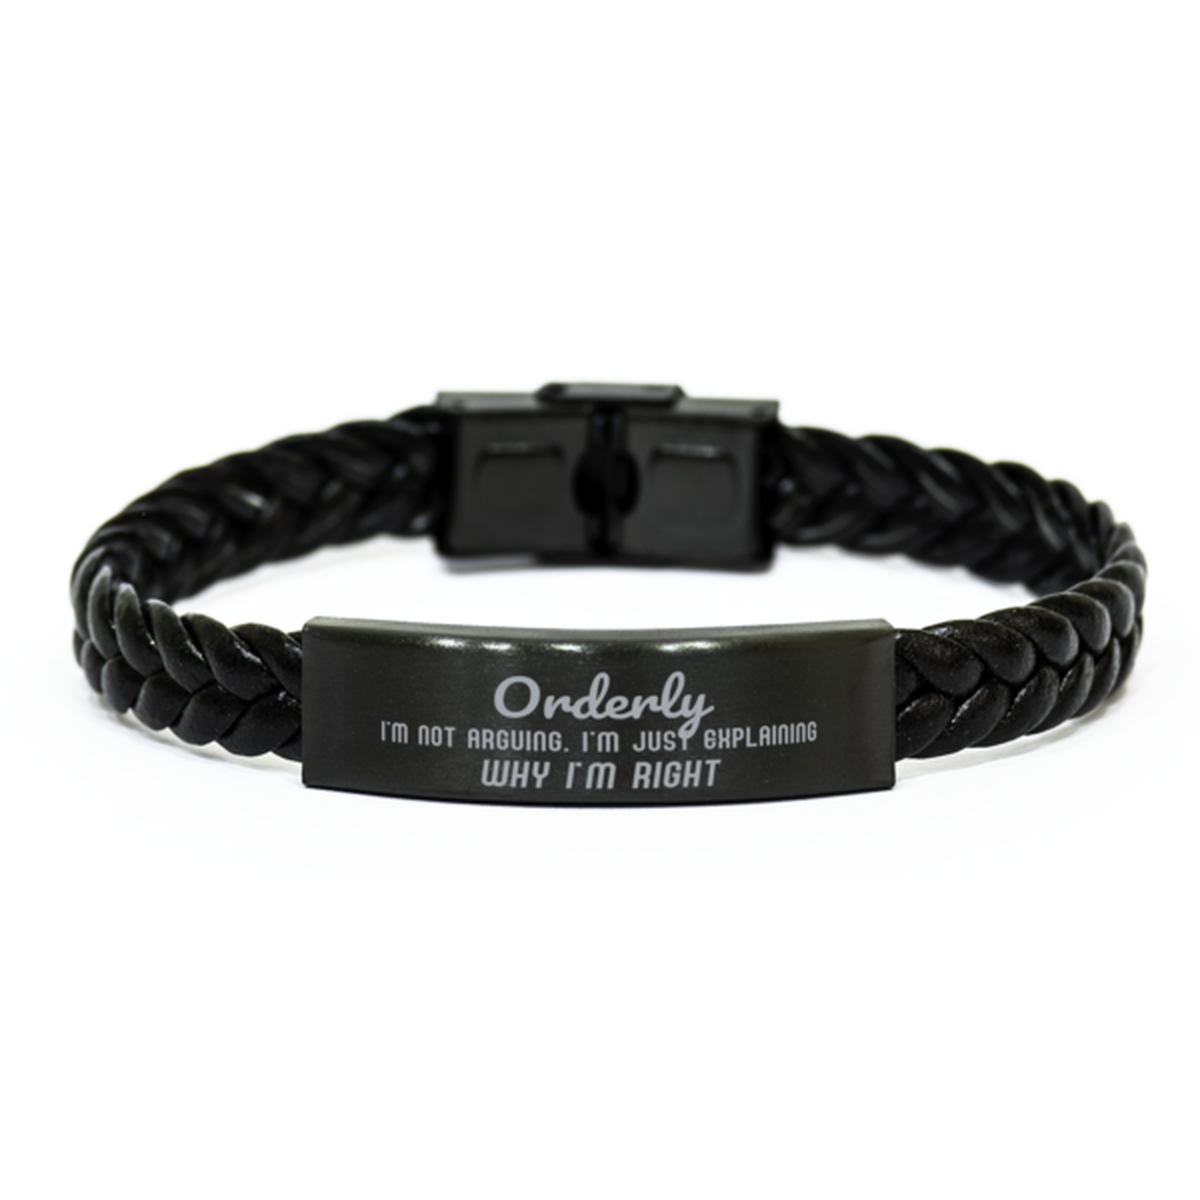 Orderly I'm not Arguing. I'm Just Explaining Why I'm RIGHT Braided Leather Bracelet, Graduation Birthday Christmas Orderly Gifts For Orderly Funny Saying Quote Present for Men Women Coworker